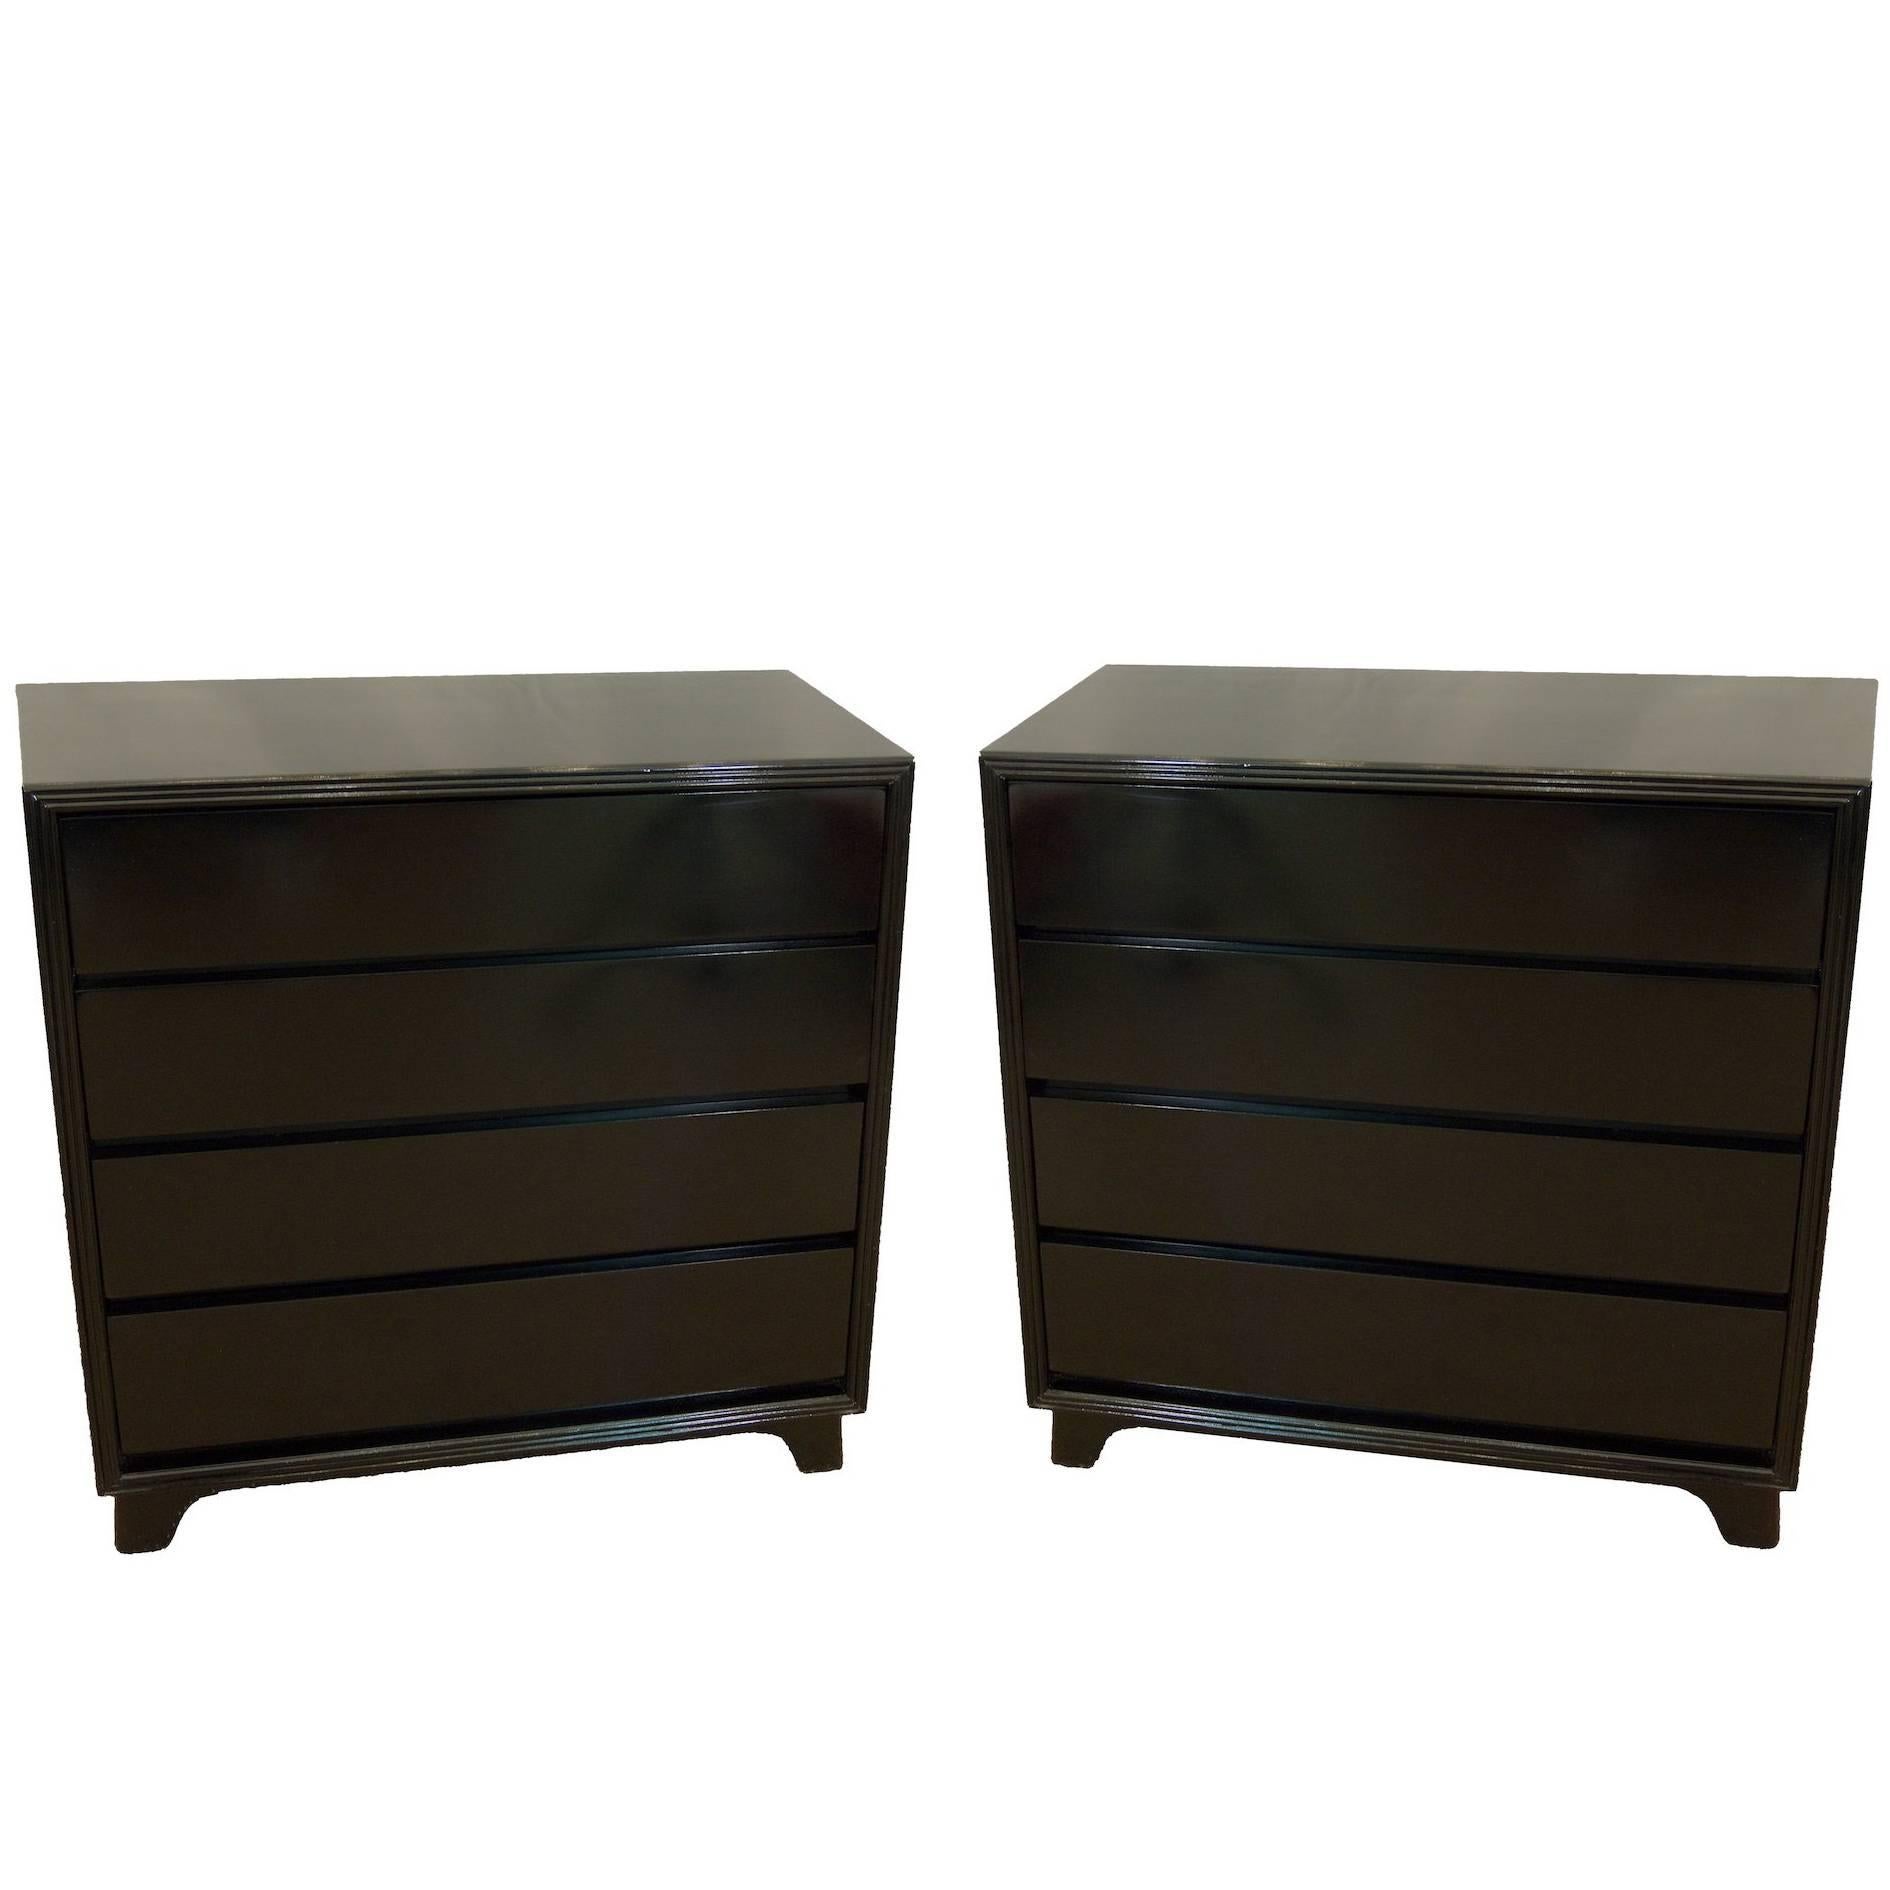 Pair of Black Lacquer Chests of Drawers